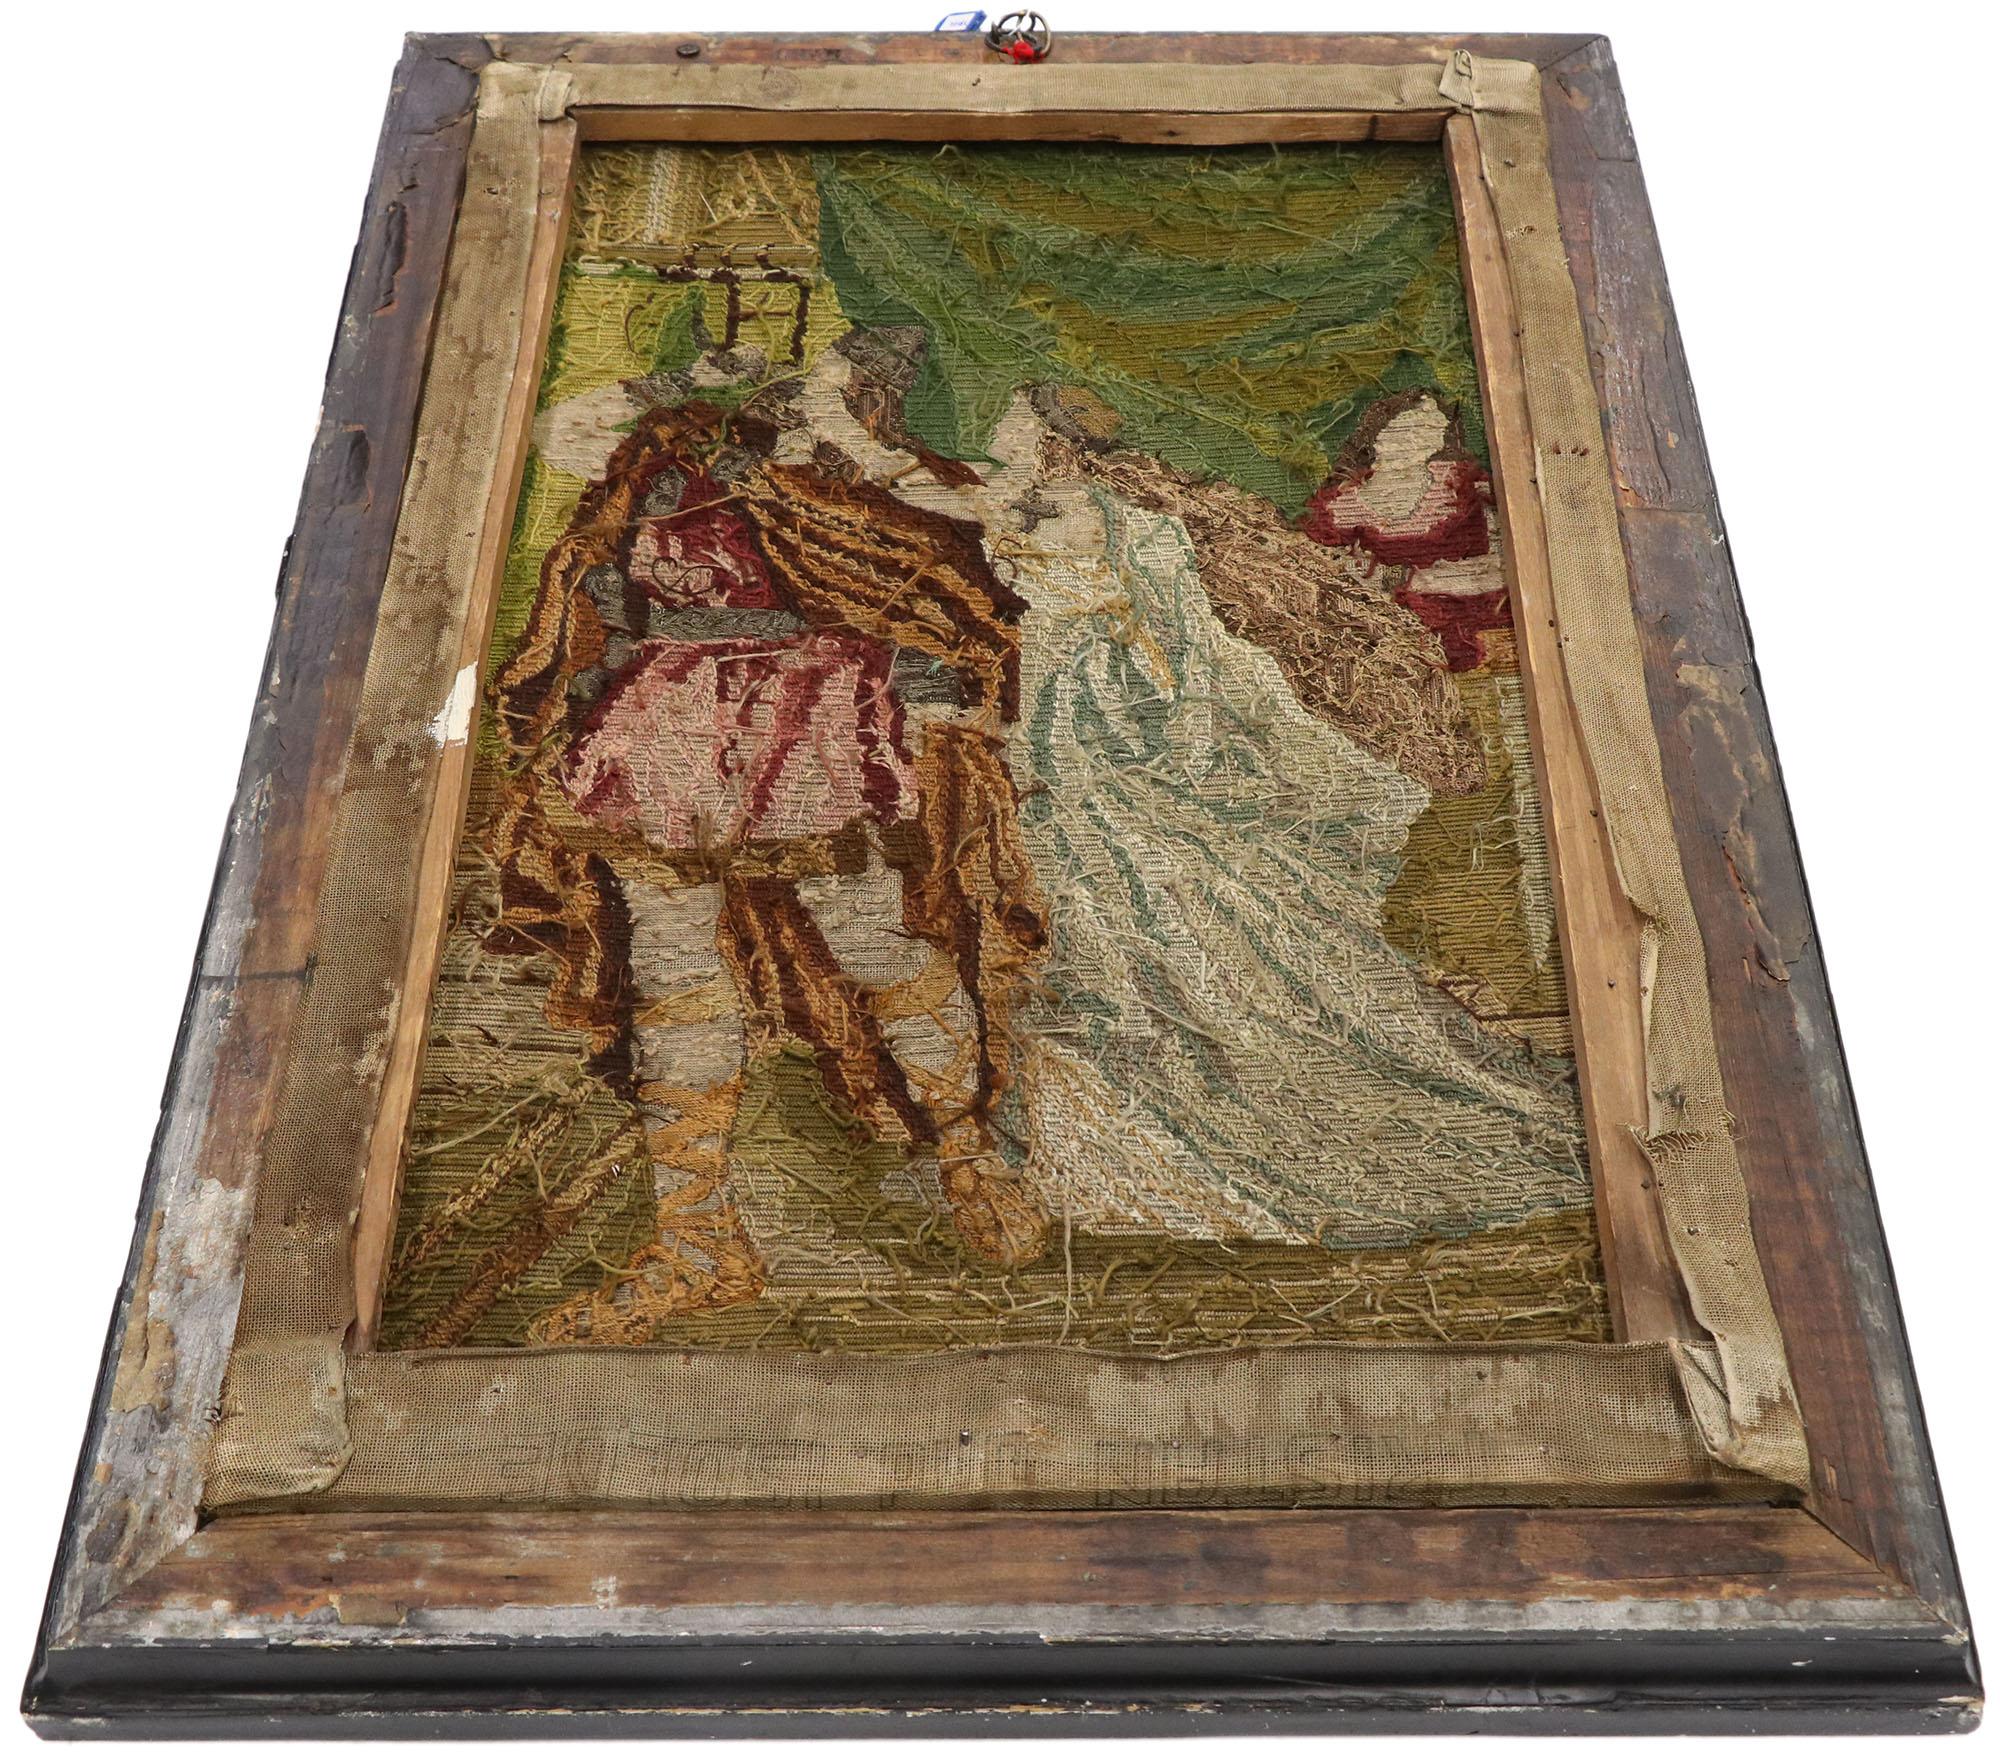 20th Century Antique English Needlepoint Tristan and Isolde Tapestry with Medieval Style For Sale